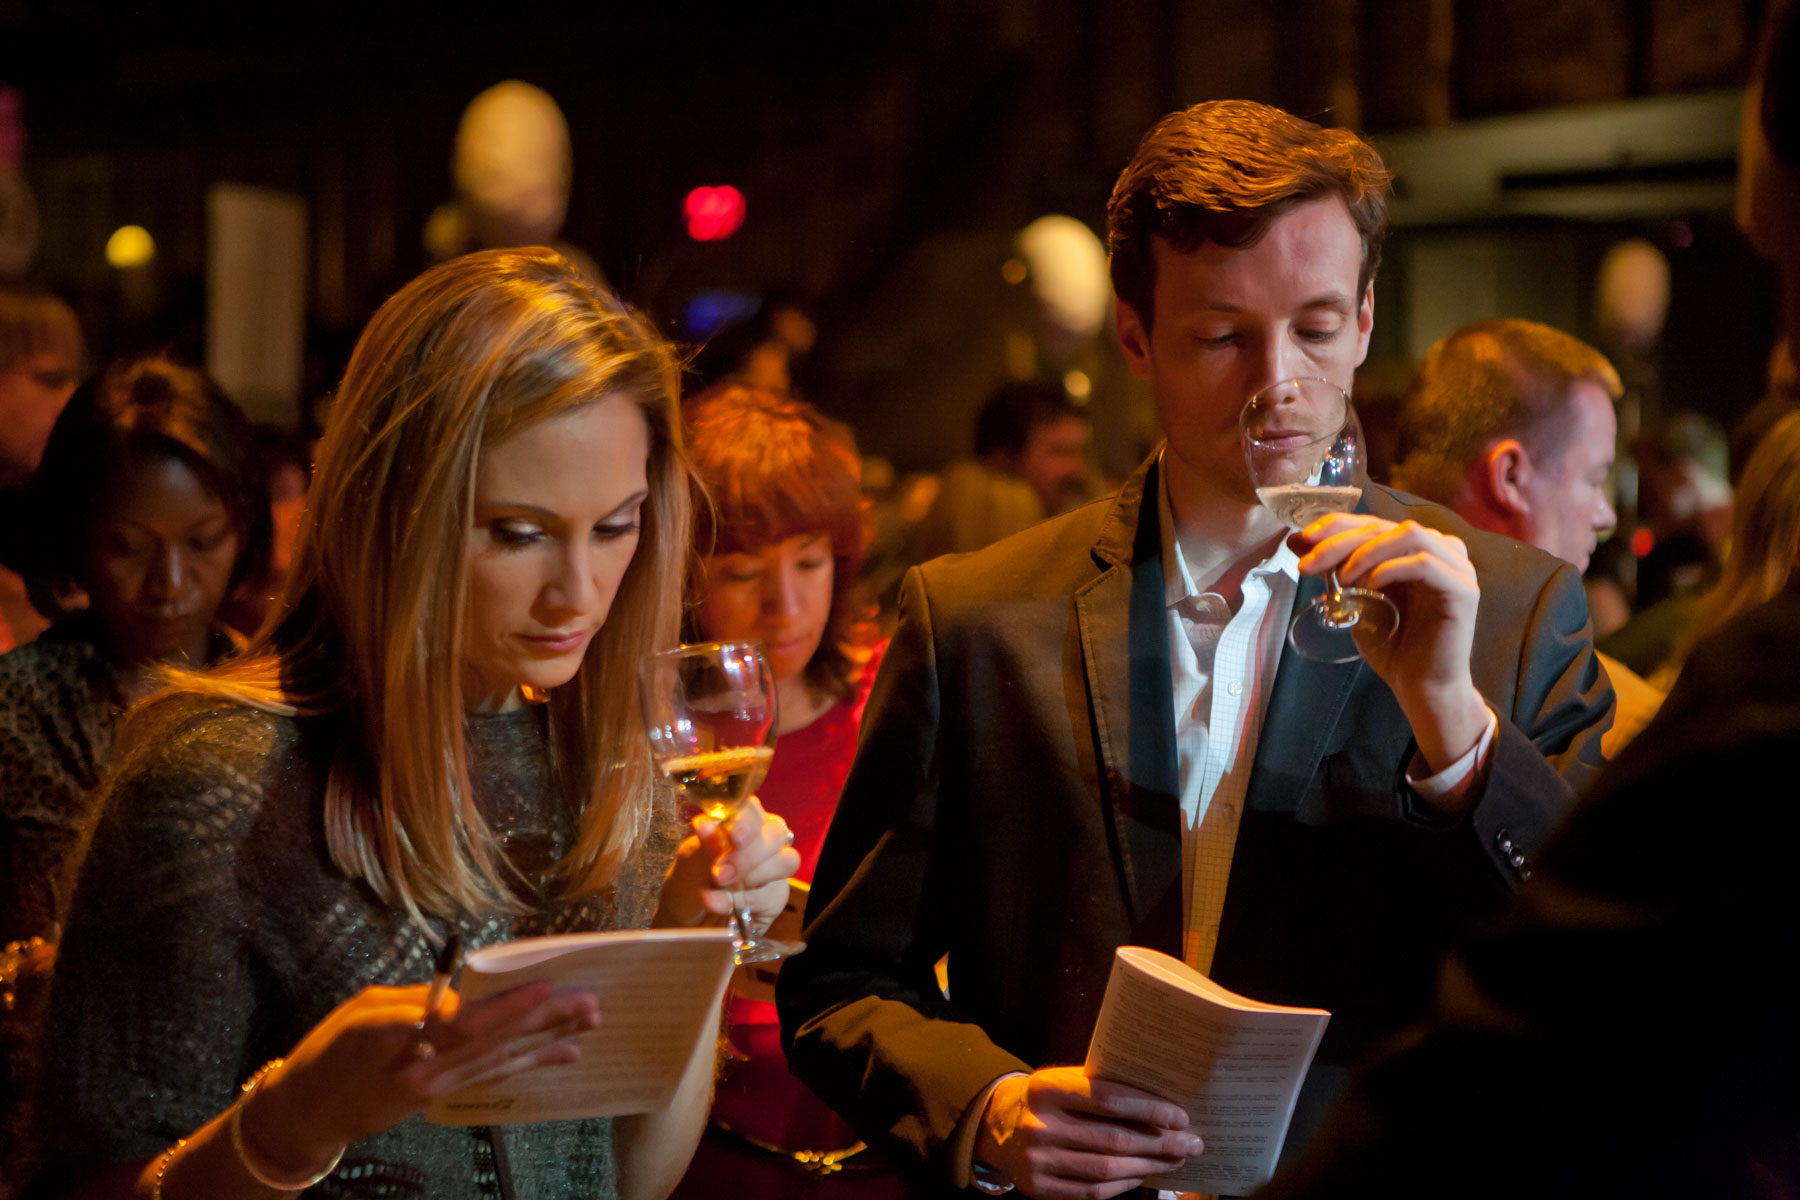 A couple tasting wine and comparing notes at the New York Winter Wine Festival.